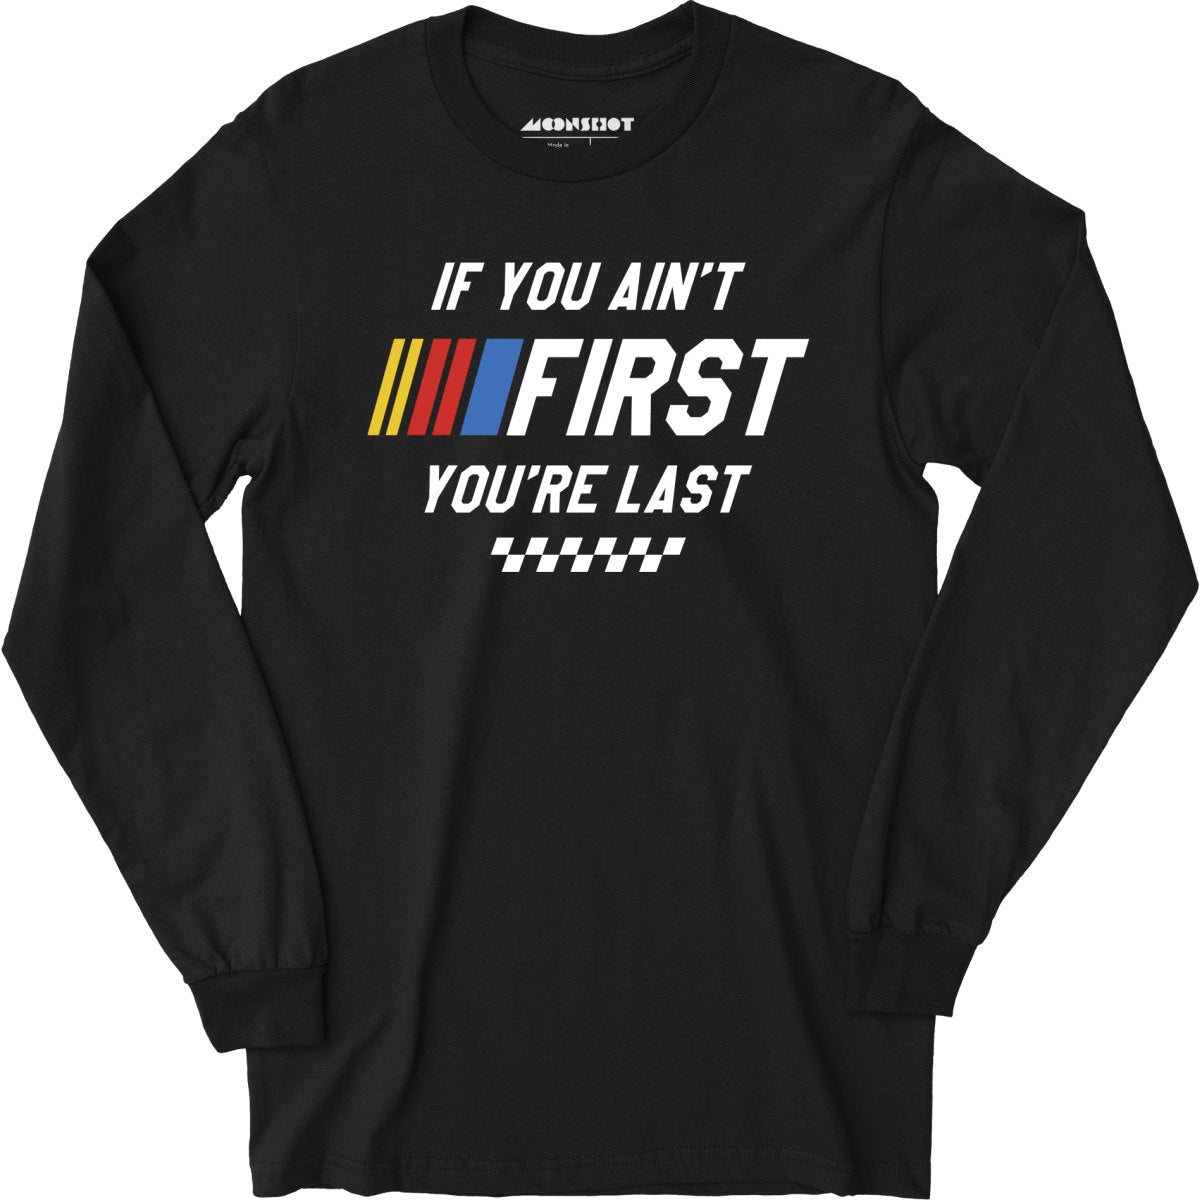 If You Ain't First You're Last - Talladega Nights - Long Sleeve T-Shirt